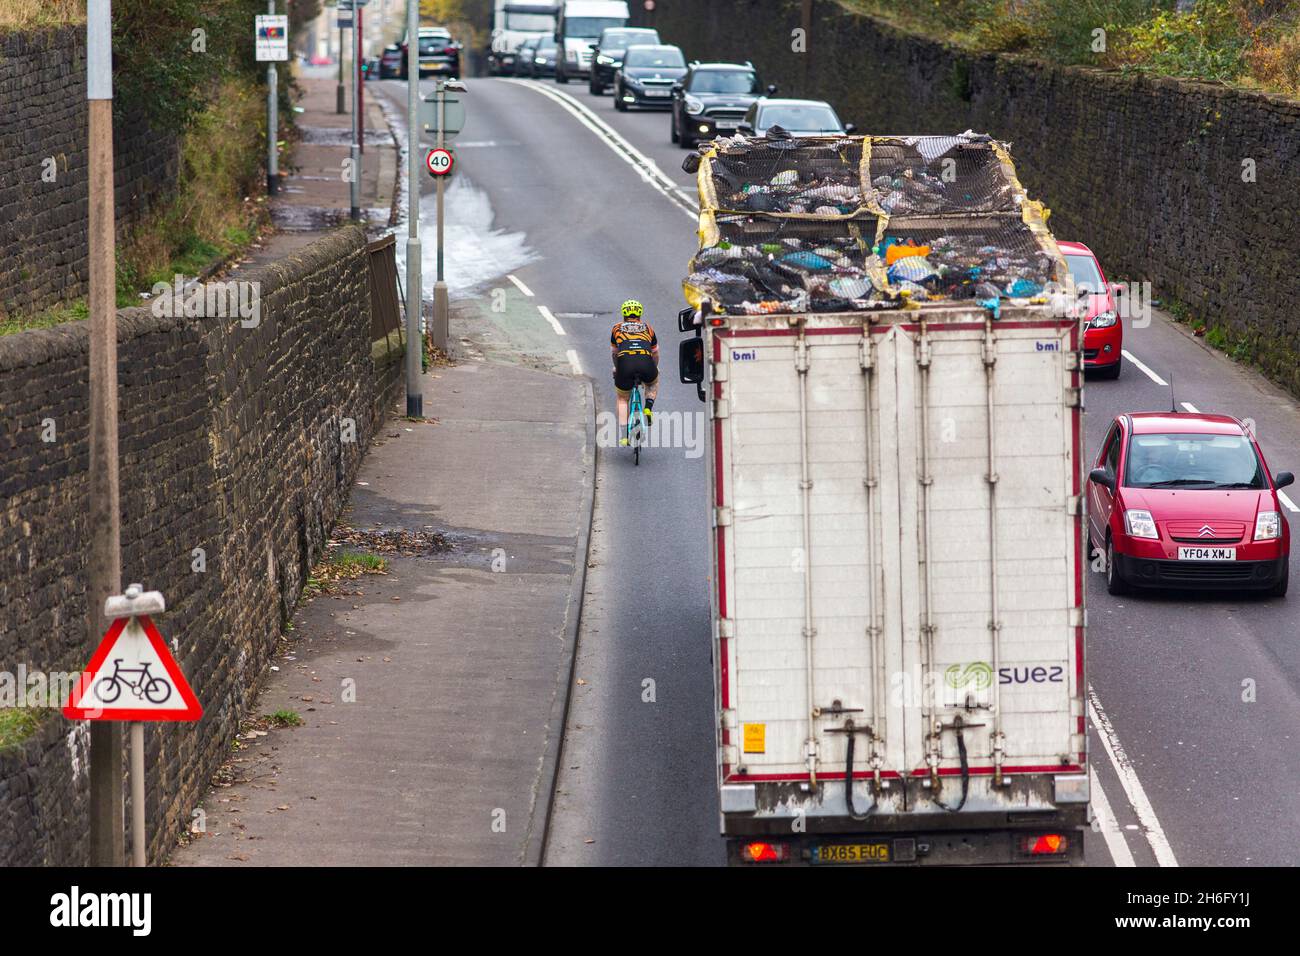 A cyclist passed closely by a waste recycling truck near Halifax, Calderdale, West Yorkshire .Close passes are not only really intimidating, but also dangerous: police attribute 'passing too close to the cyclist' as a contributory factor in a staggering 25% of serious collisions between cyclists and large vehicles. At the same time, we know that 62% of people in the UK consider cycling on the roads ‘too dangerous’. If we want safer roads for cyclists as well as more people cycling, putting an end to close passing is absolutely key, Stock Photo